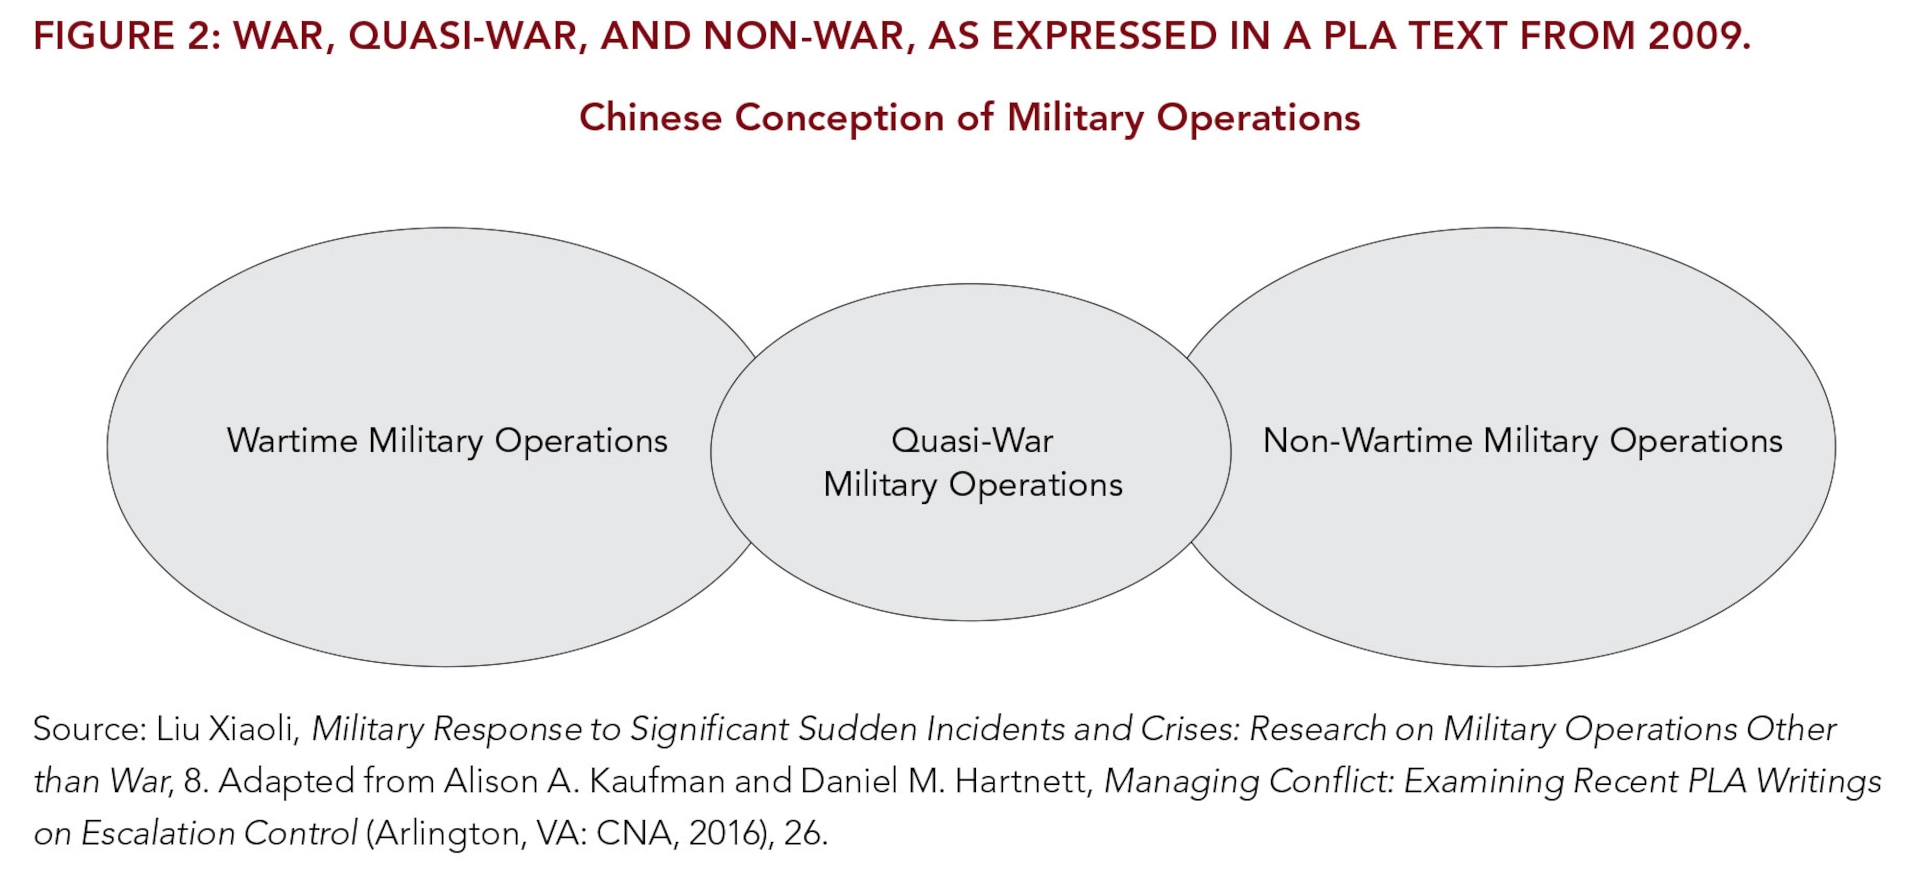 Figure 2: War, Quasi-War, and Non-War, as Expressed in a PLA Text From 2009.